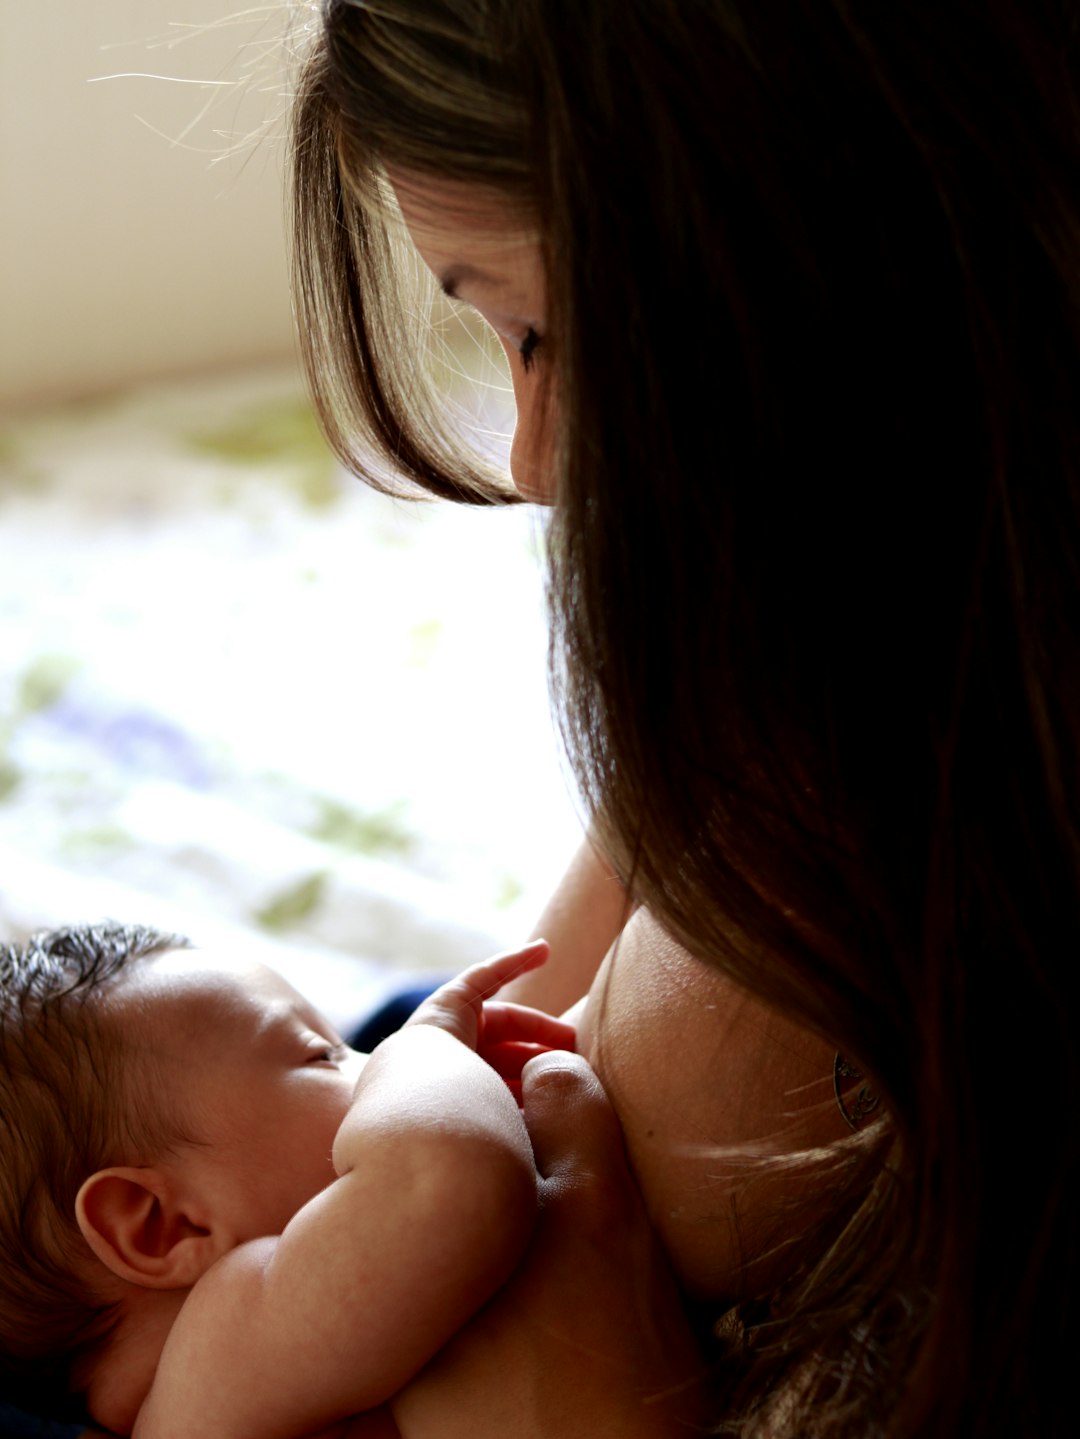 August - The Breastfeeding Month. Breast Milk. The Best Food For Baby

